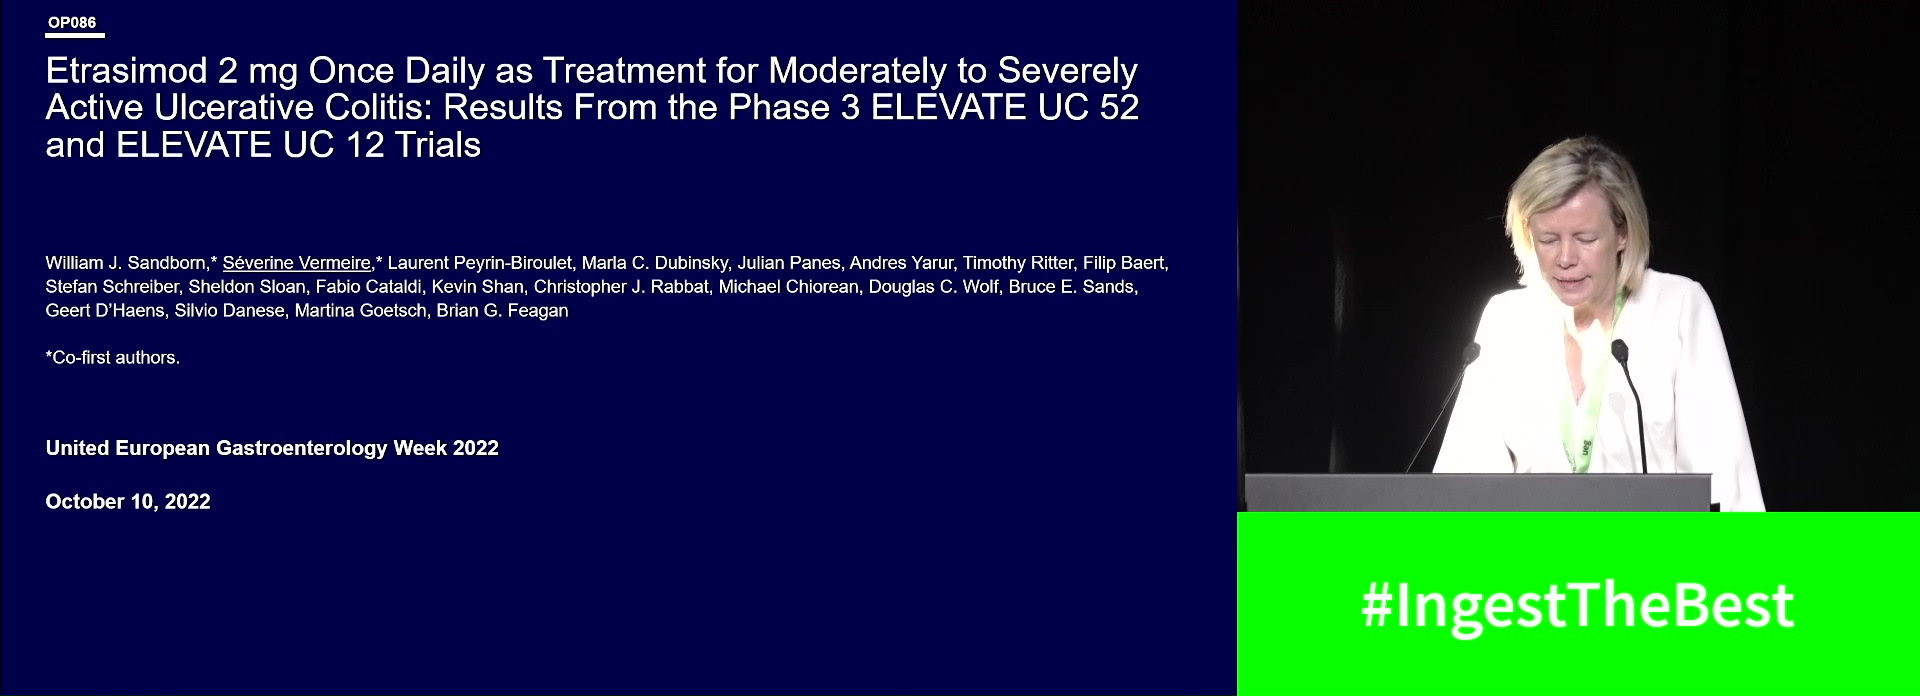 ETRASIMOD 2MG ONCE DAILY AS TREATMENT FOR MODERATELY TO SEVERELY ACTIVE ULCERATIVE COLITIS: RESULTS FROM THE PHASE 3 ELEVATE UC 52 AND ELEVATE UC 12 TRIALS